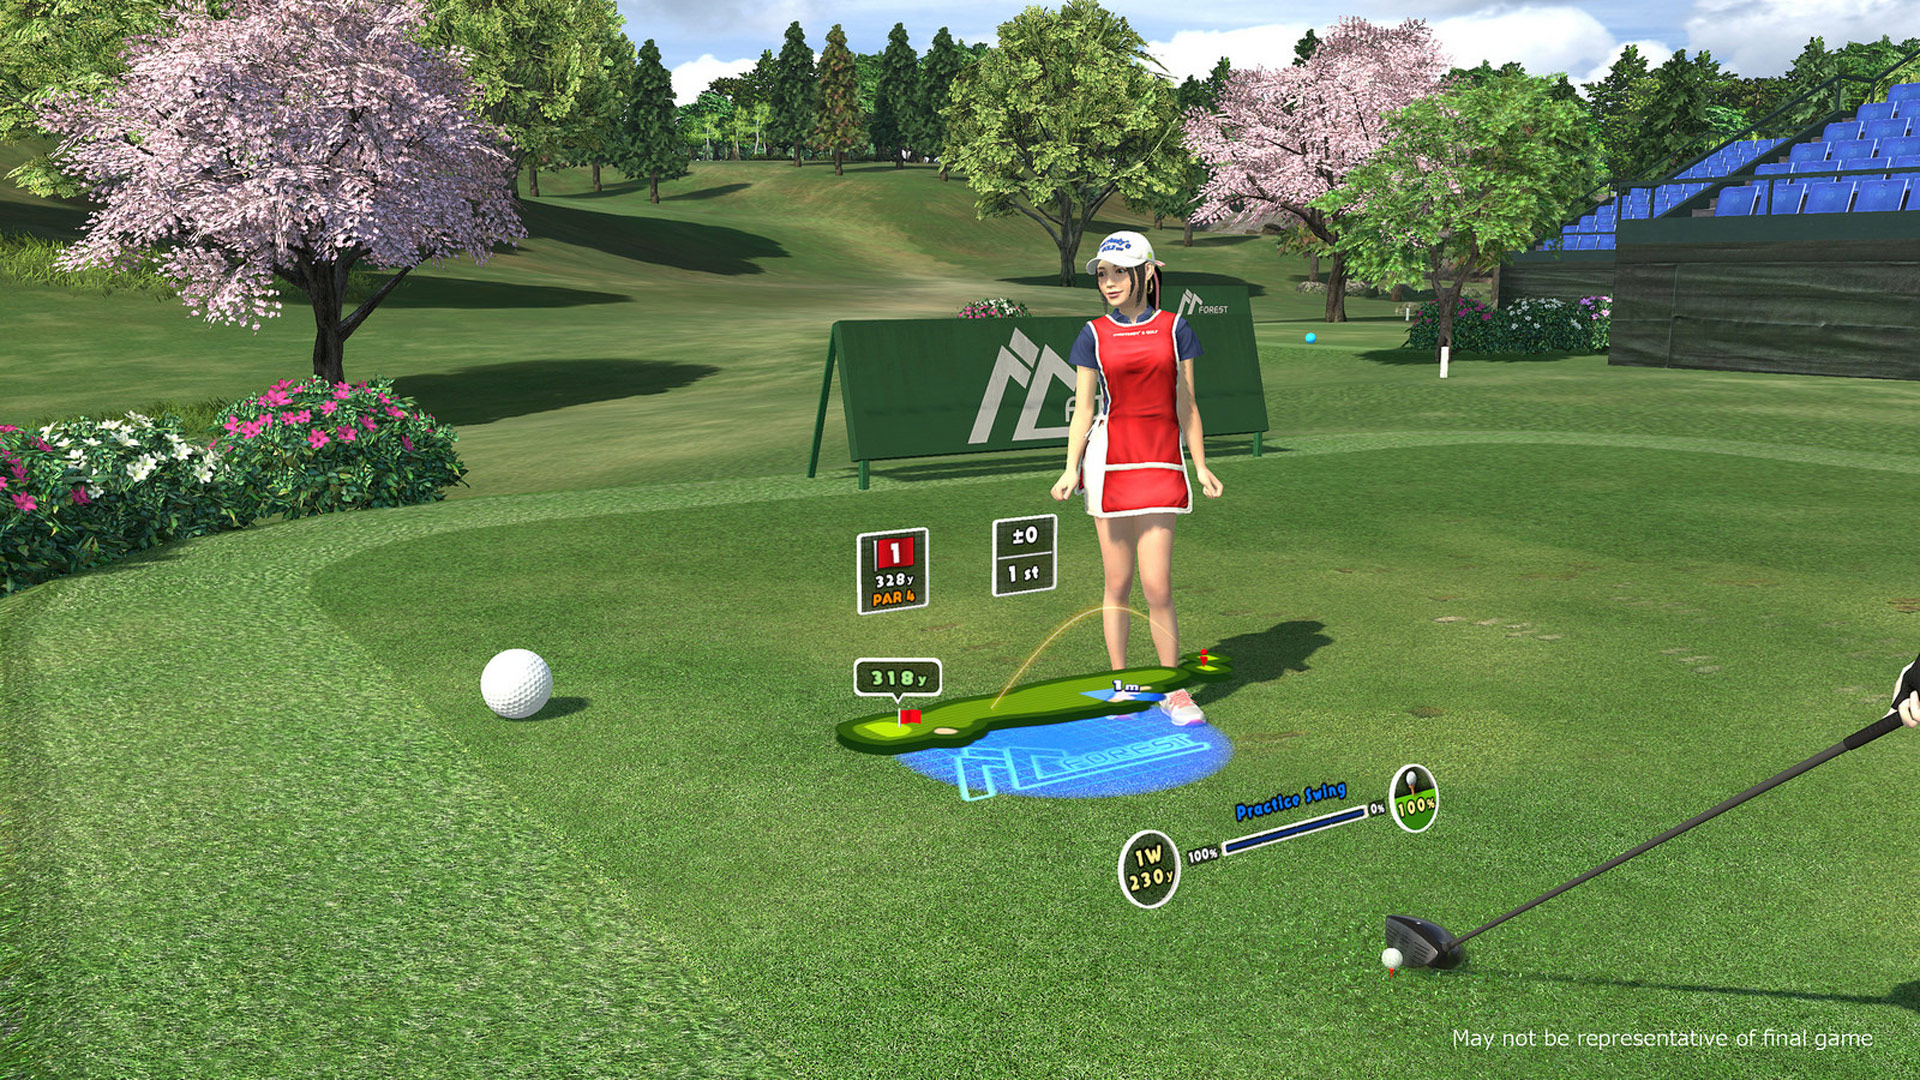 everybody's golf vr ps4 review